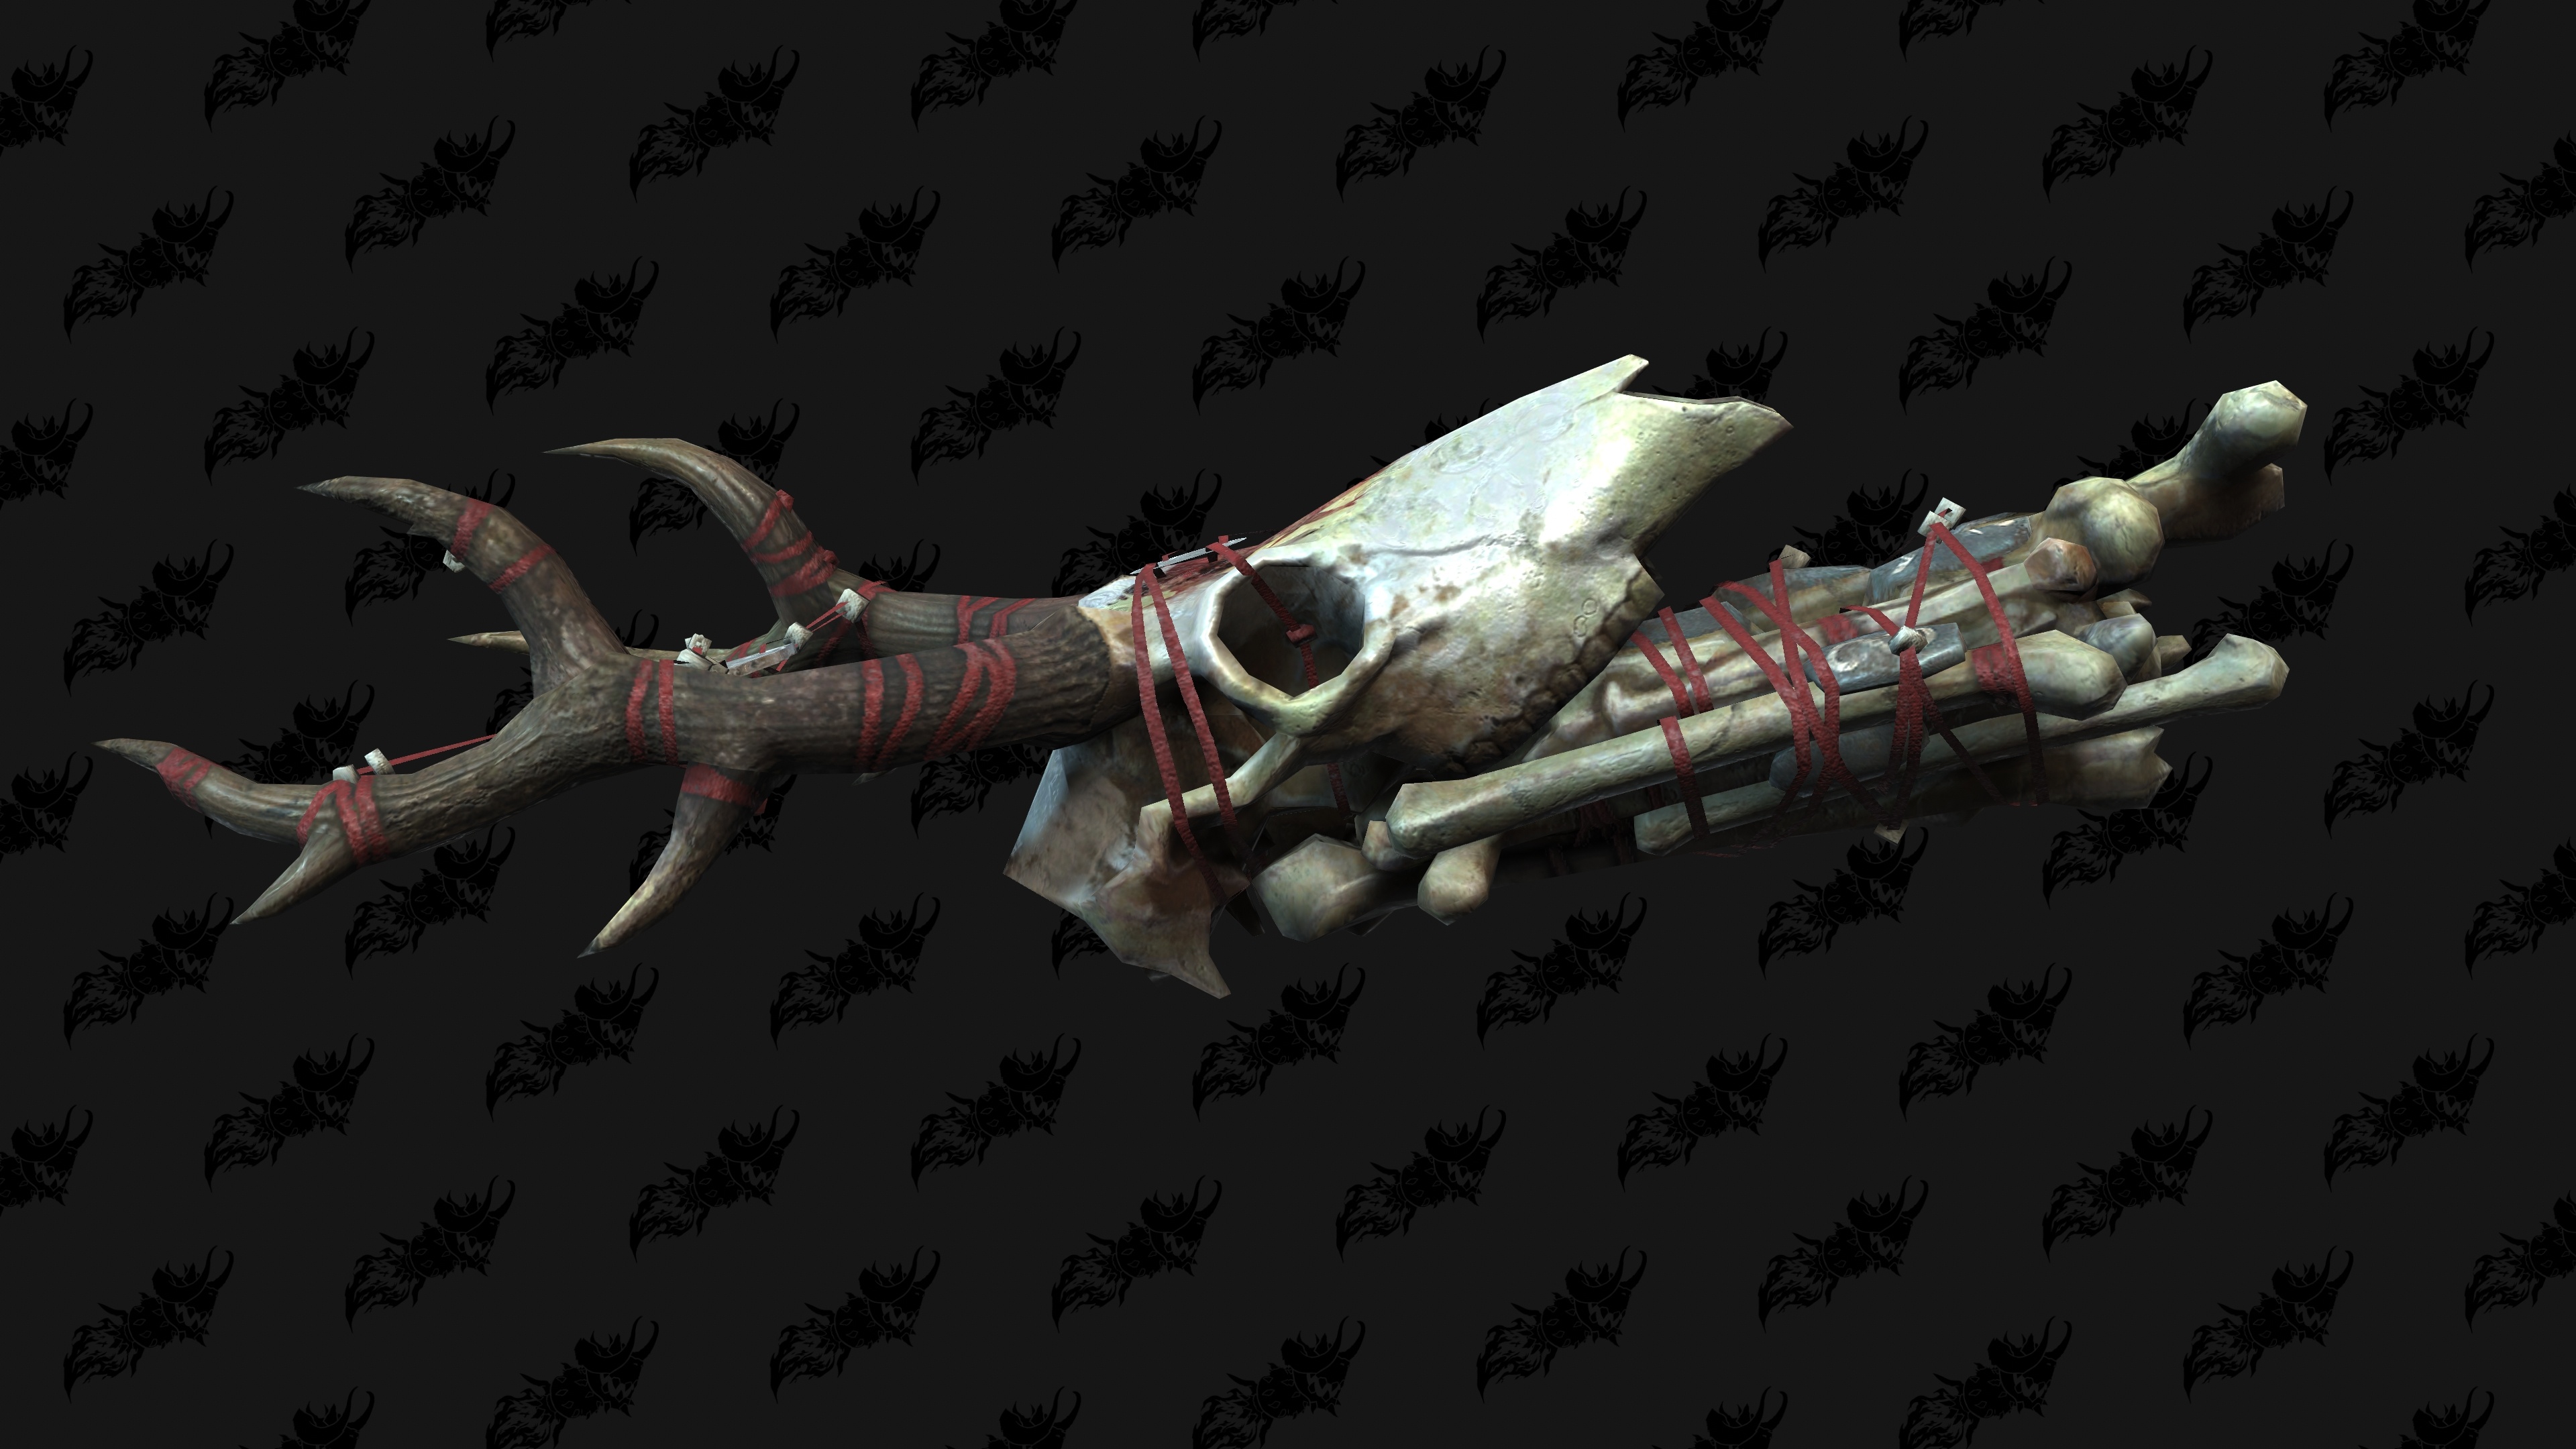 First Look At Exclusive Diablo 4 KFC Weapon Cosmetics - Wowhead News